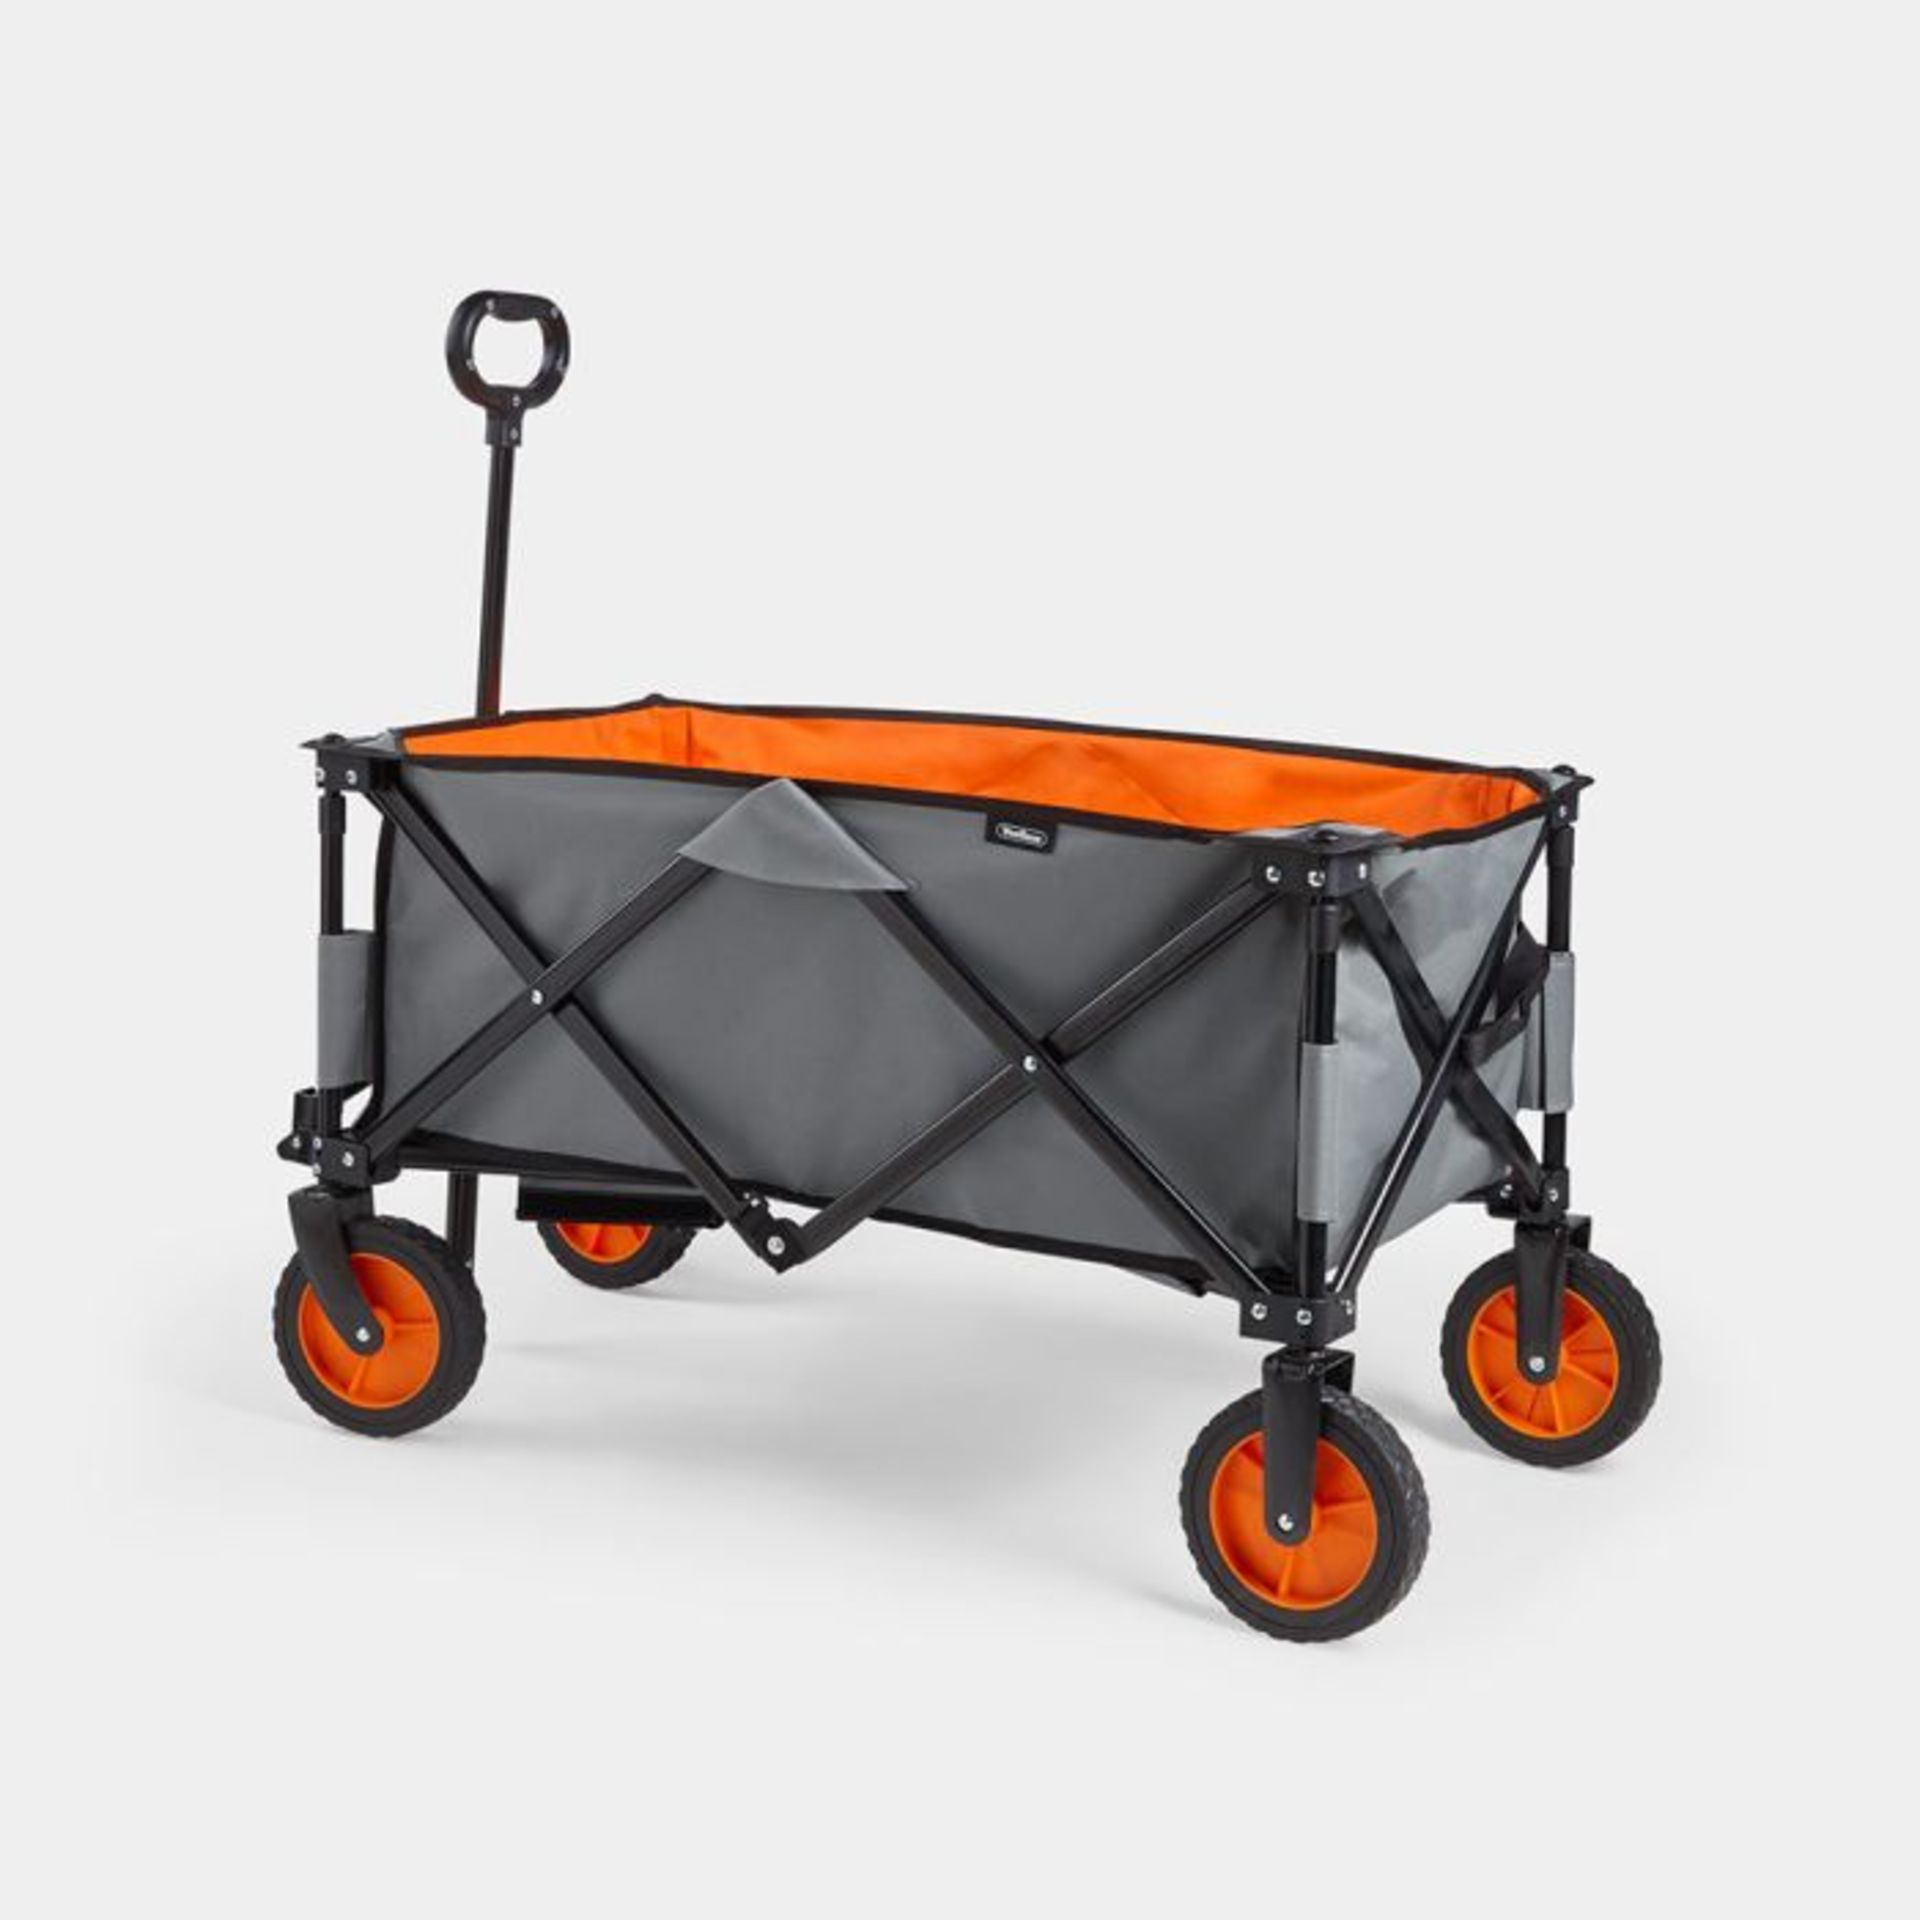 Folding Cart. - ER33. Whether you’re going to a festival or on a camping trip, say goodbye to